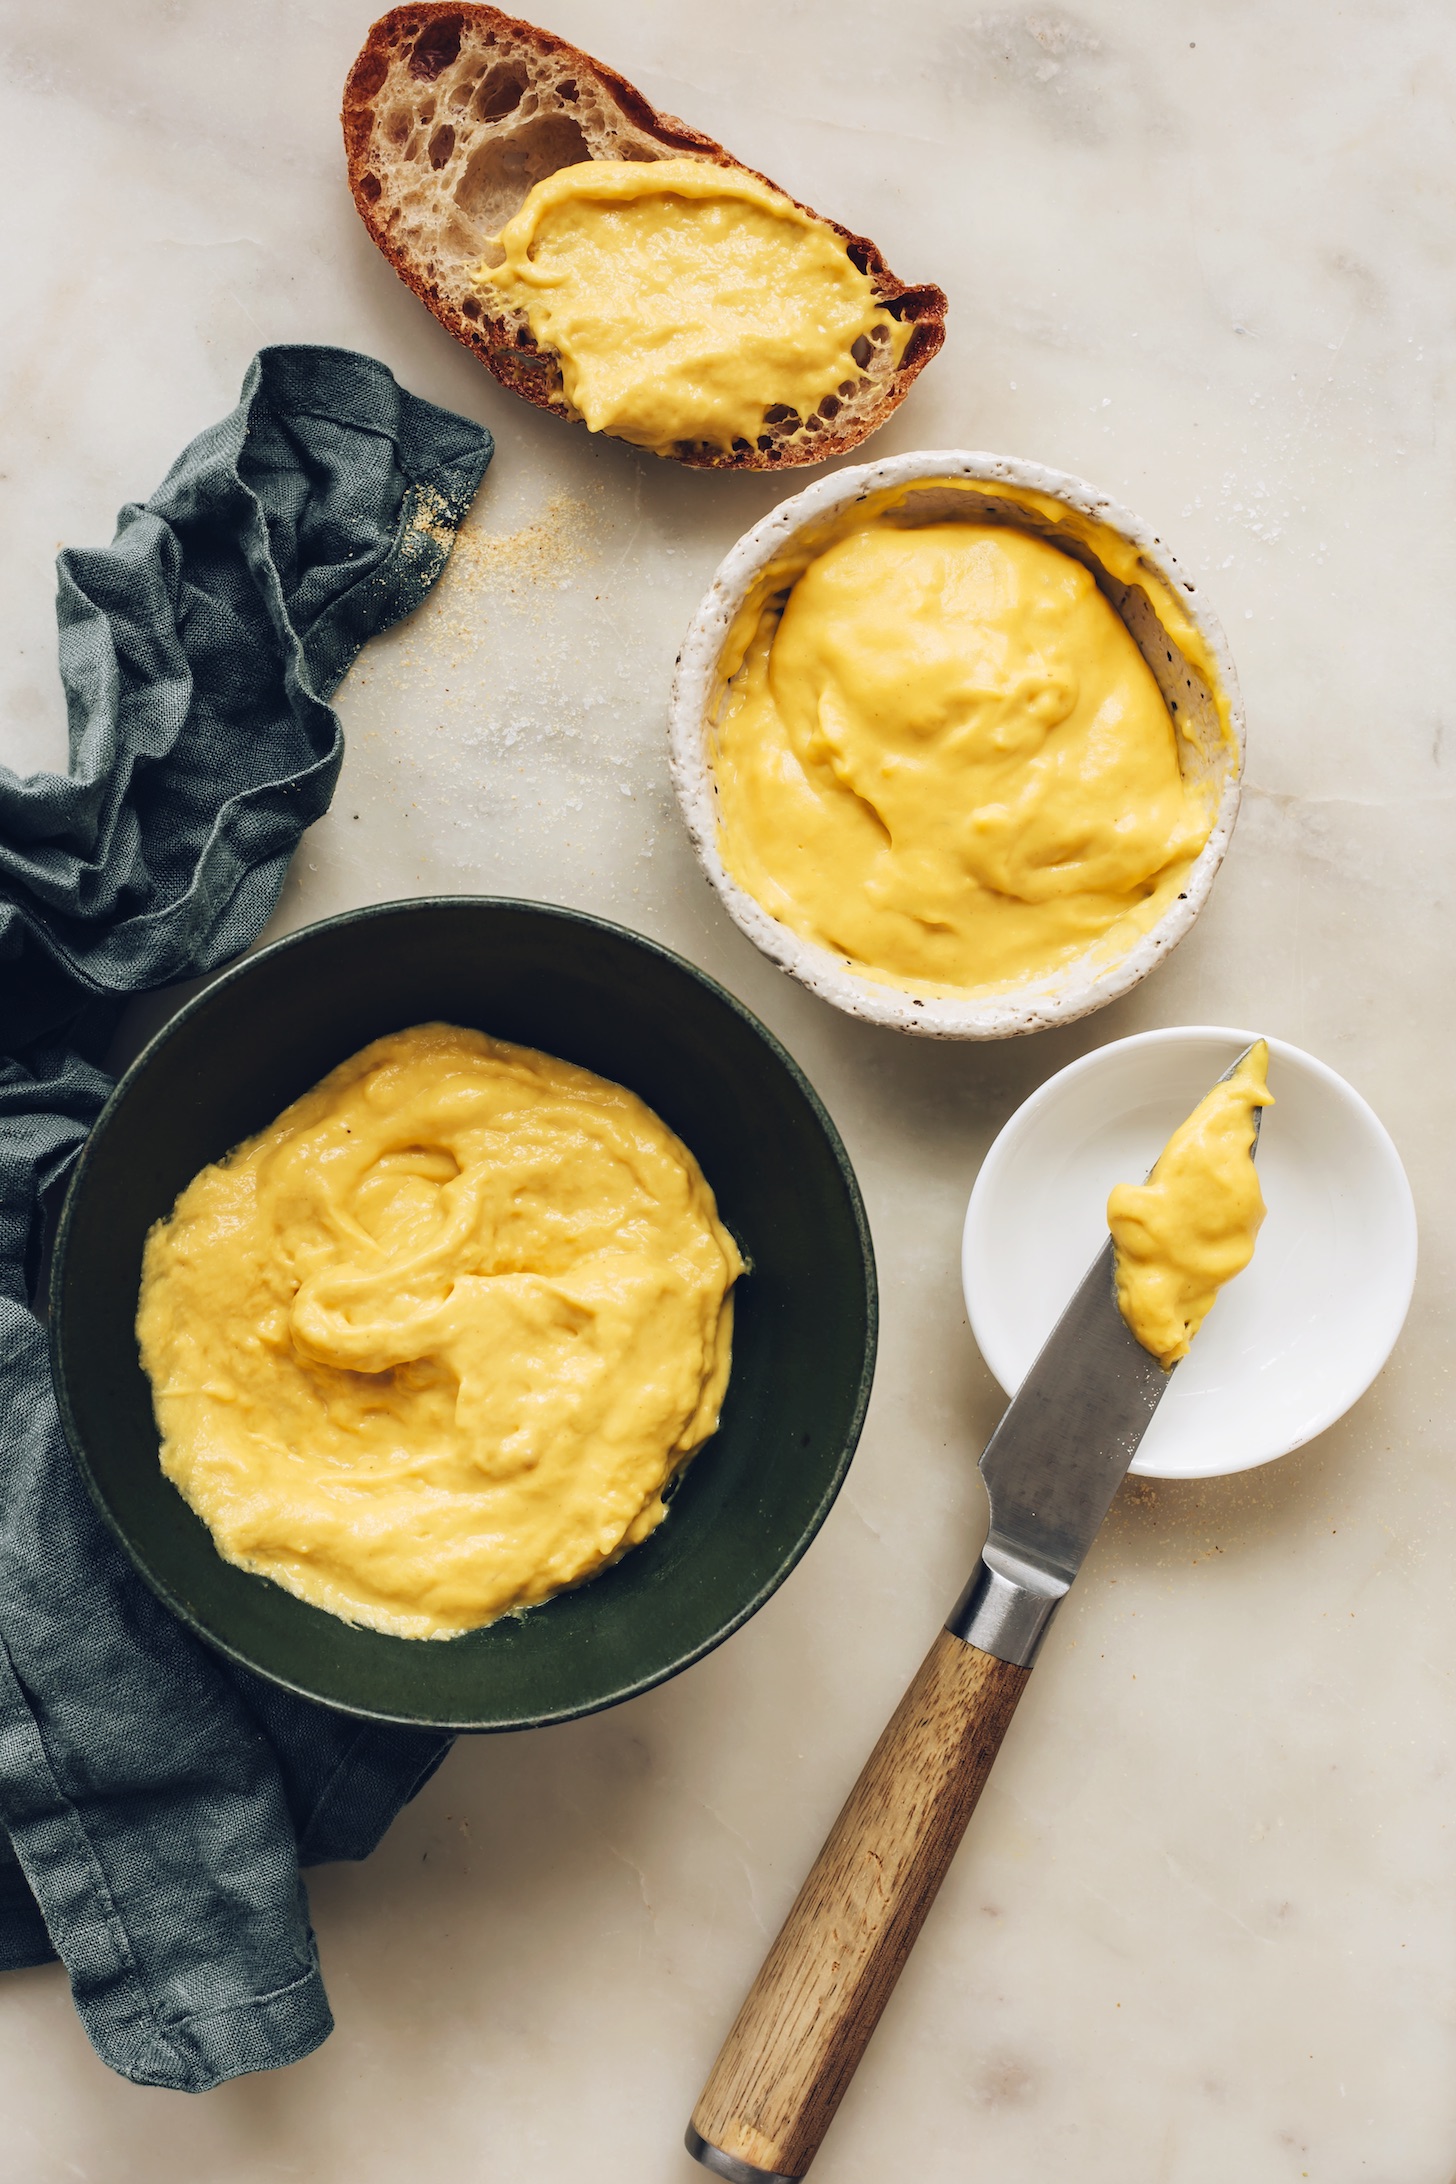 Slice of sourdough bread next to bowls of our easy vegan cheddar cheese recipe